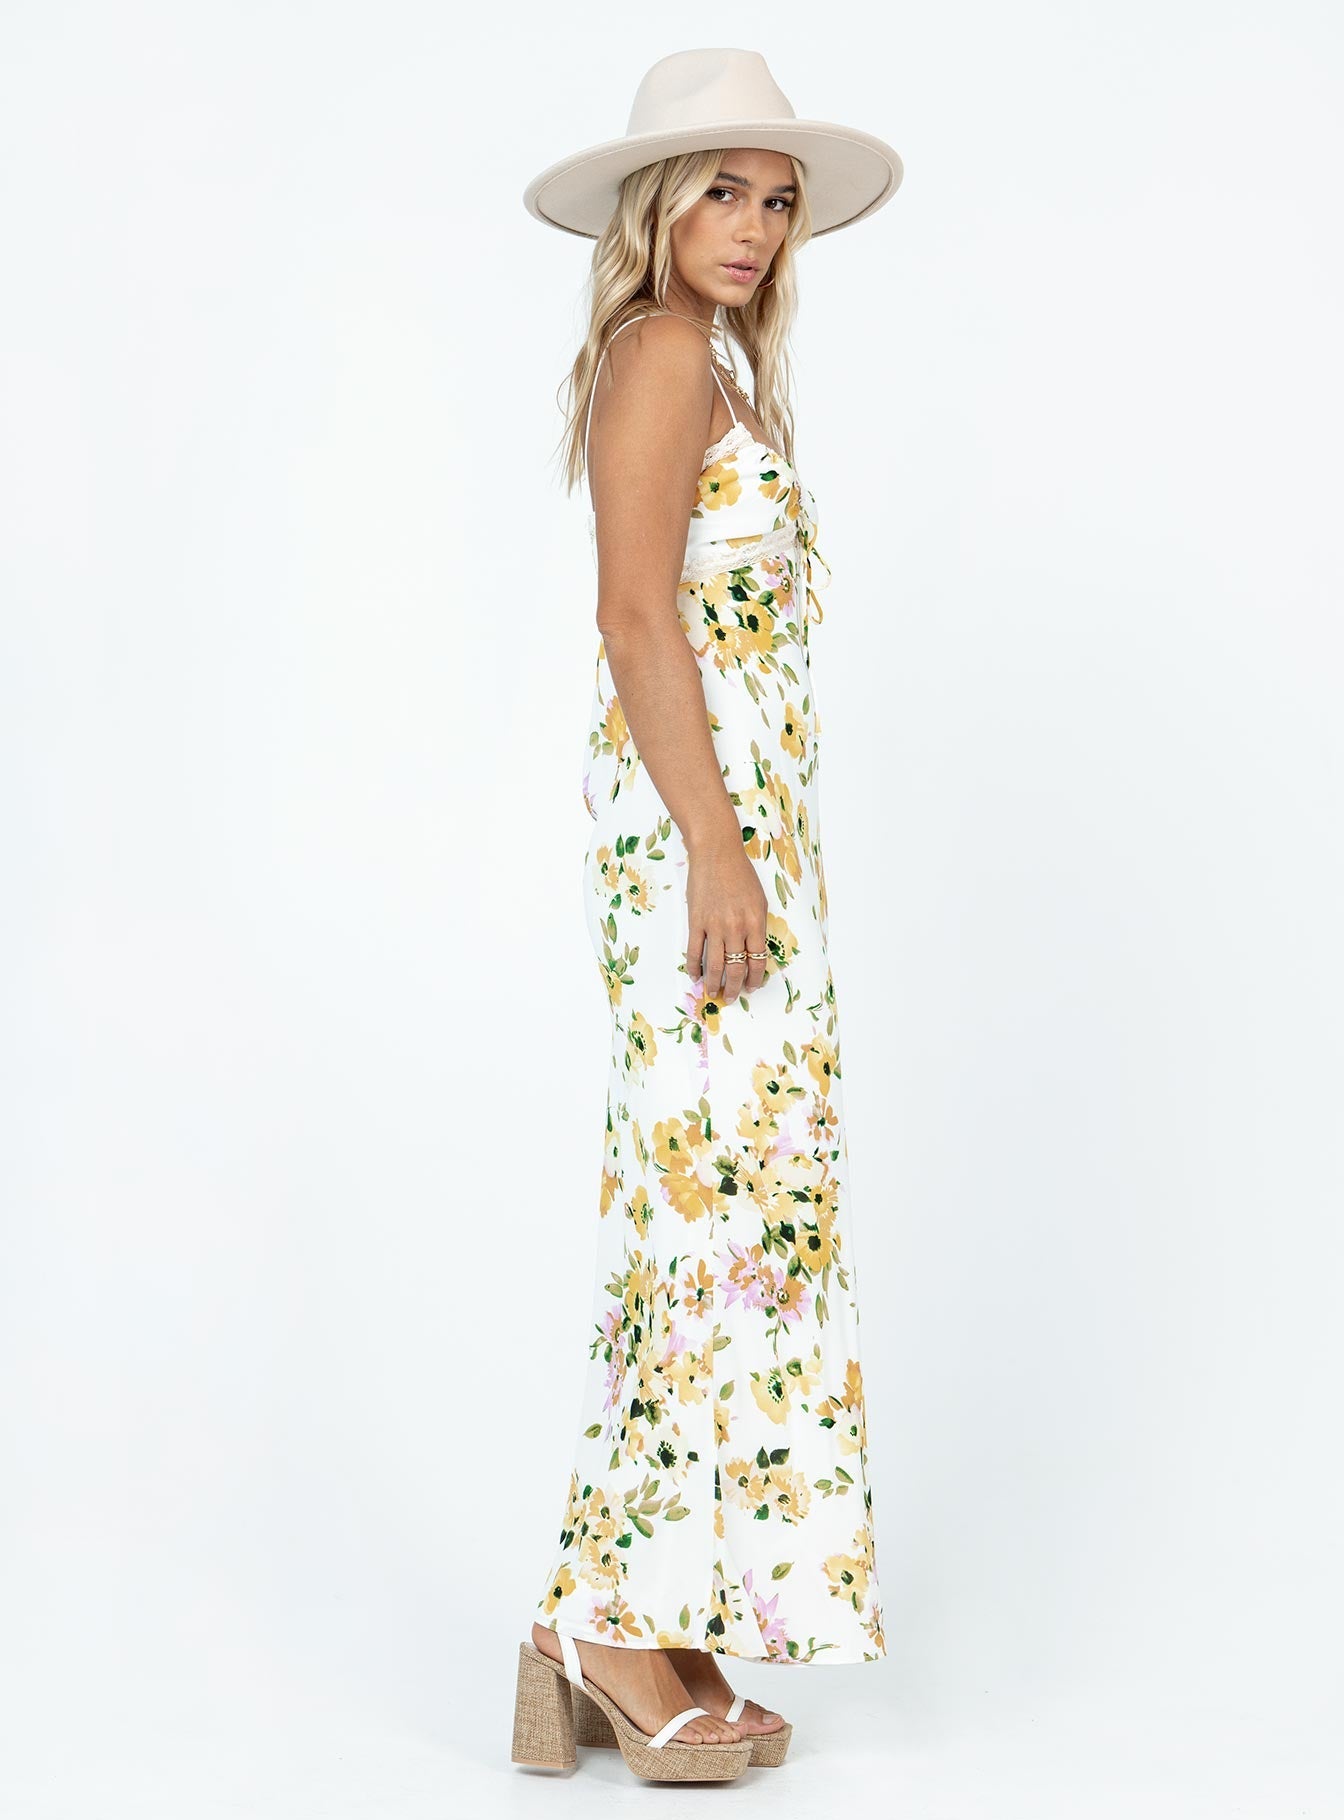 Shop Formal Dress - Emily Maxi Dress White / Yellow Floral secondary image